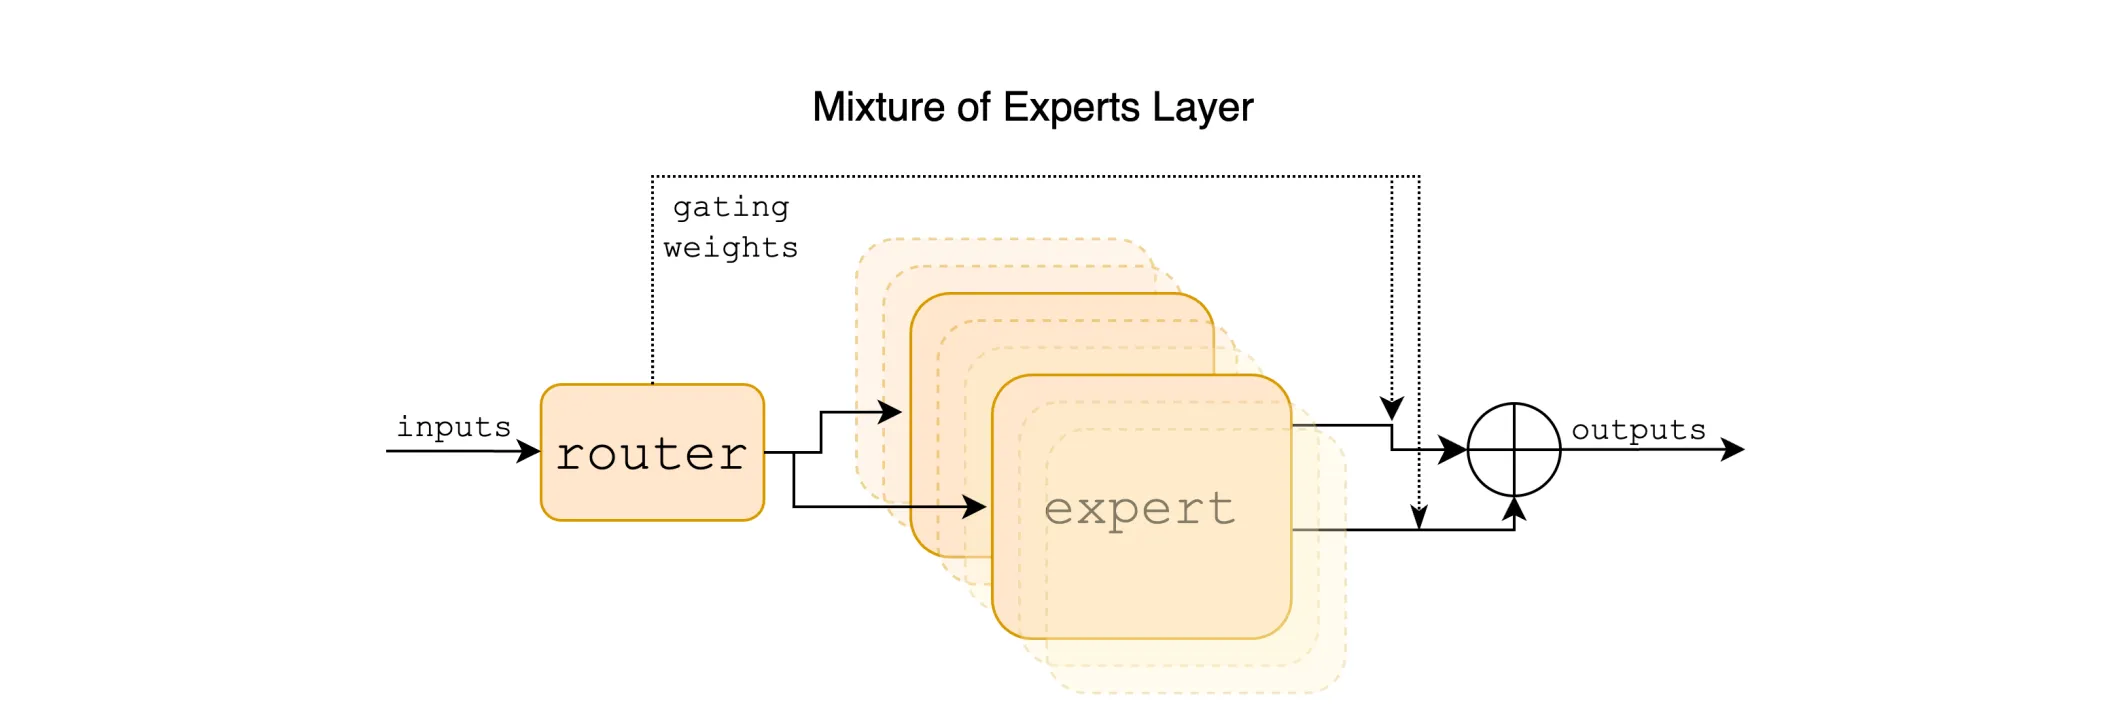 Mixture of Experts Layer